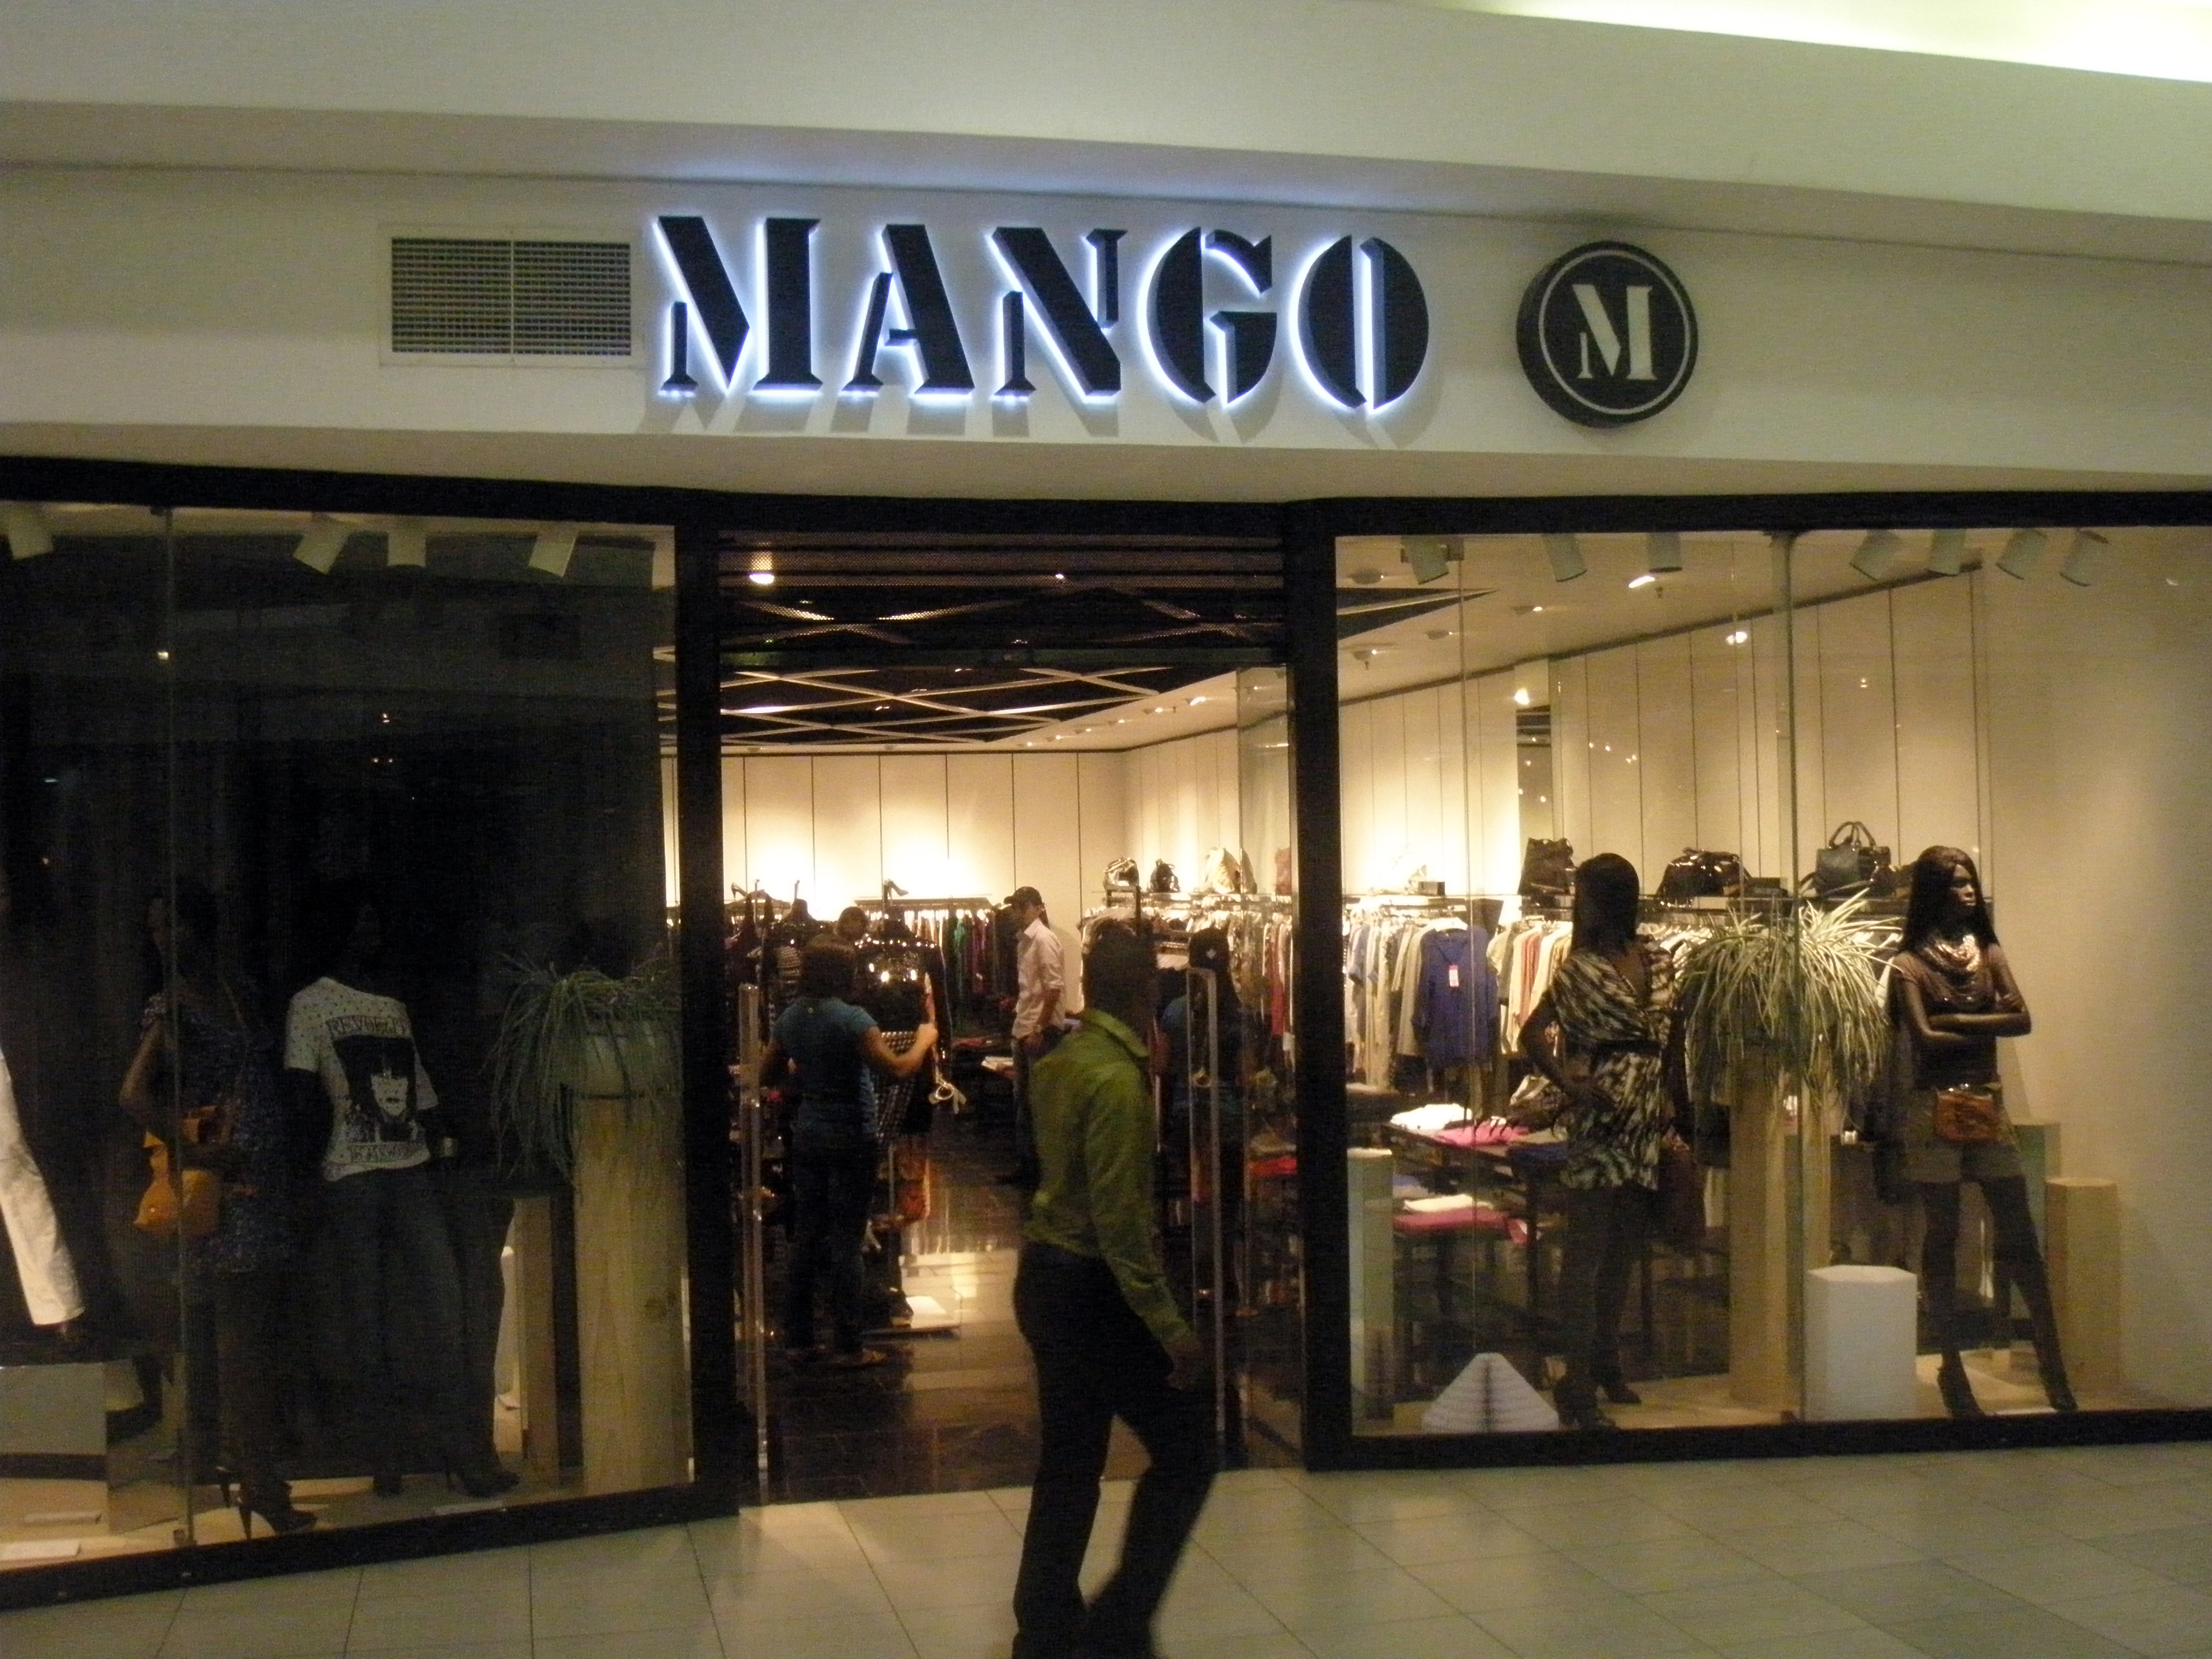 A Mango shop in the Palms Mall, sited in Victory Island, Lagos (Nigeria).